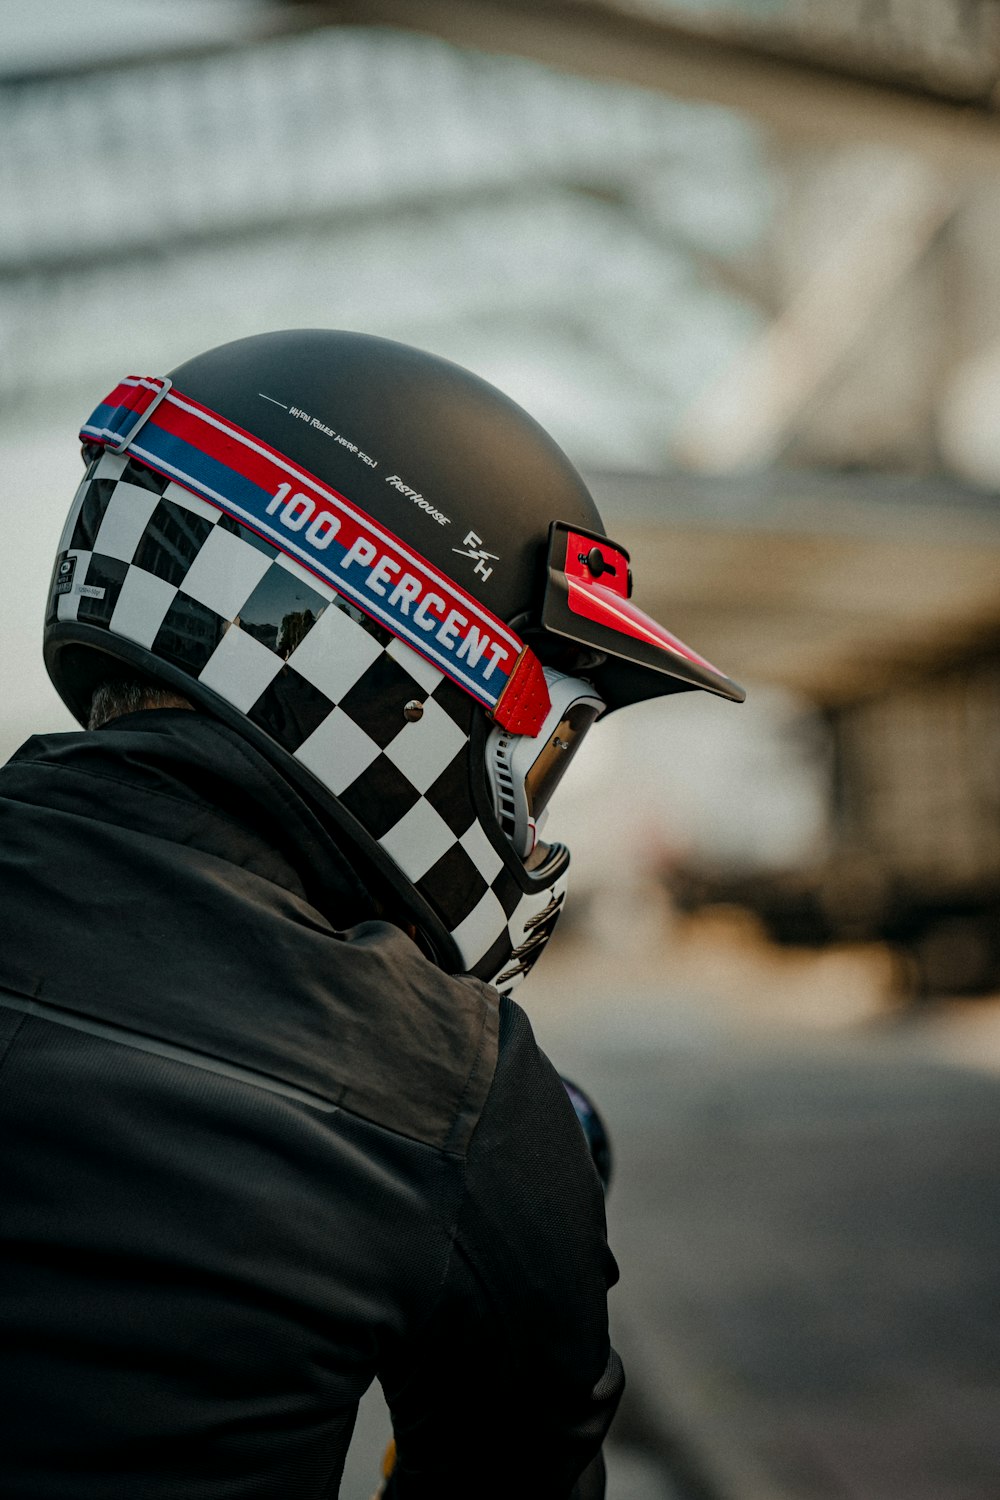 person wearing black and white helmet